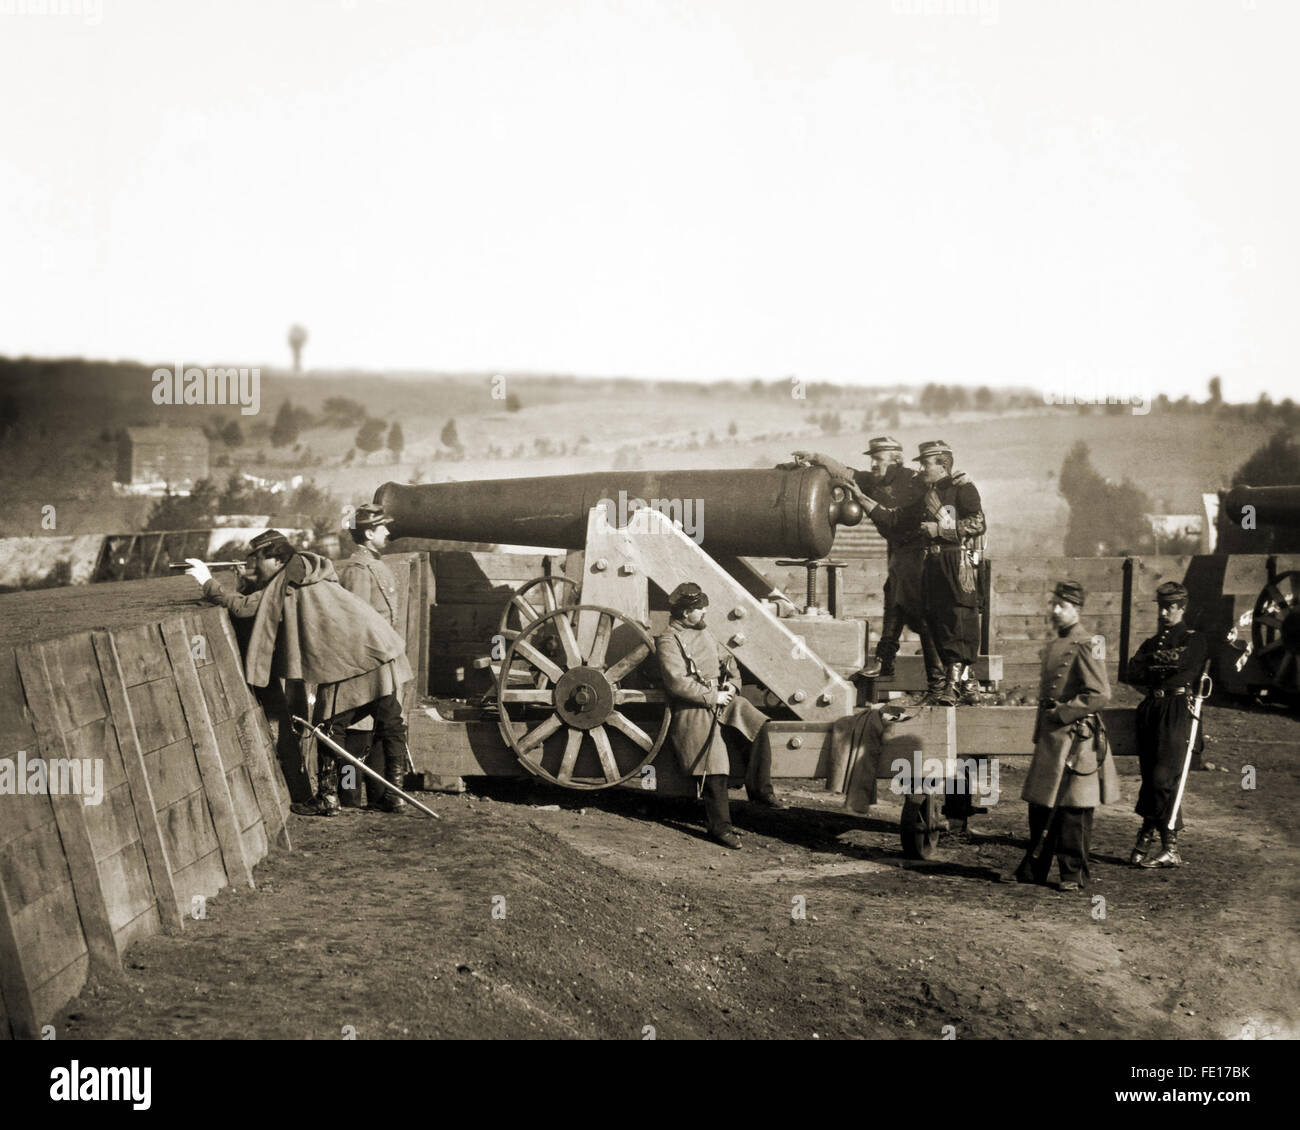 Union Army soldiers in entrenchment on battlefield with cannon. Stock Photo